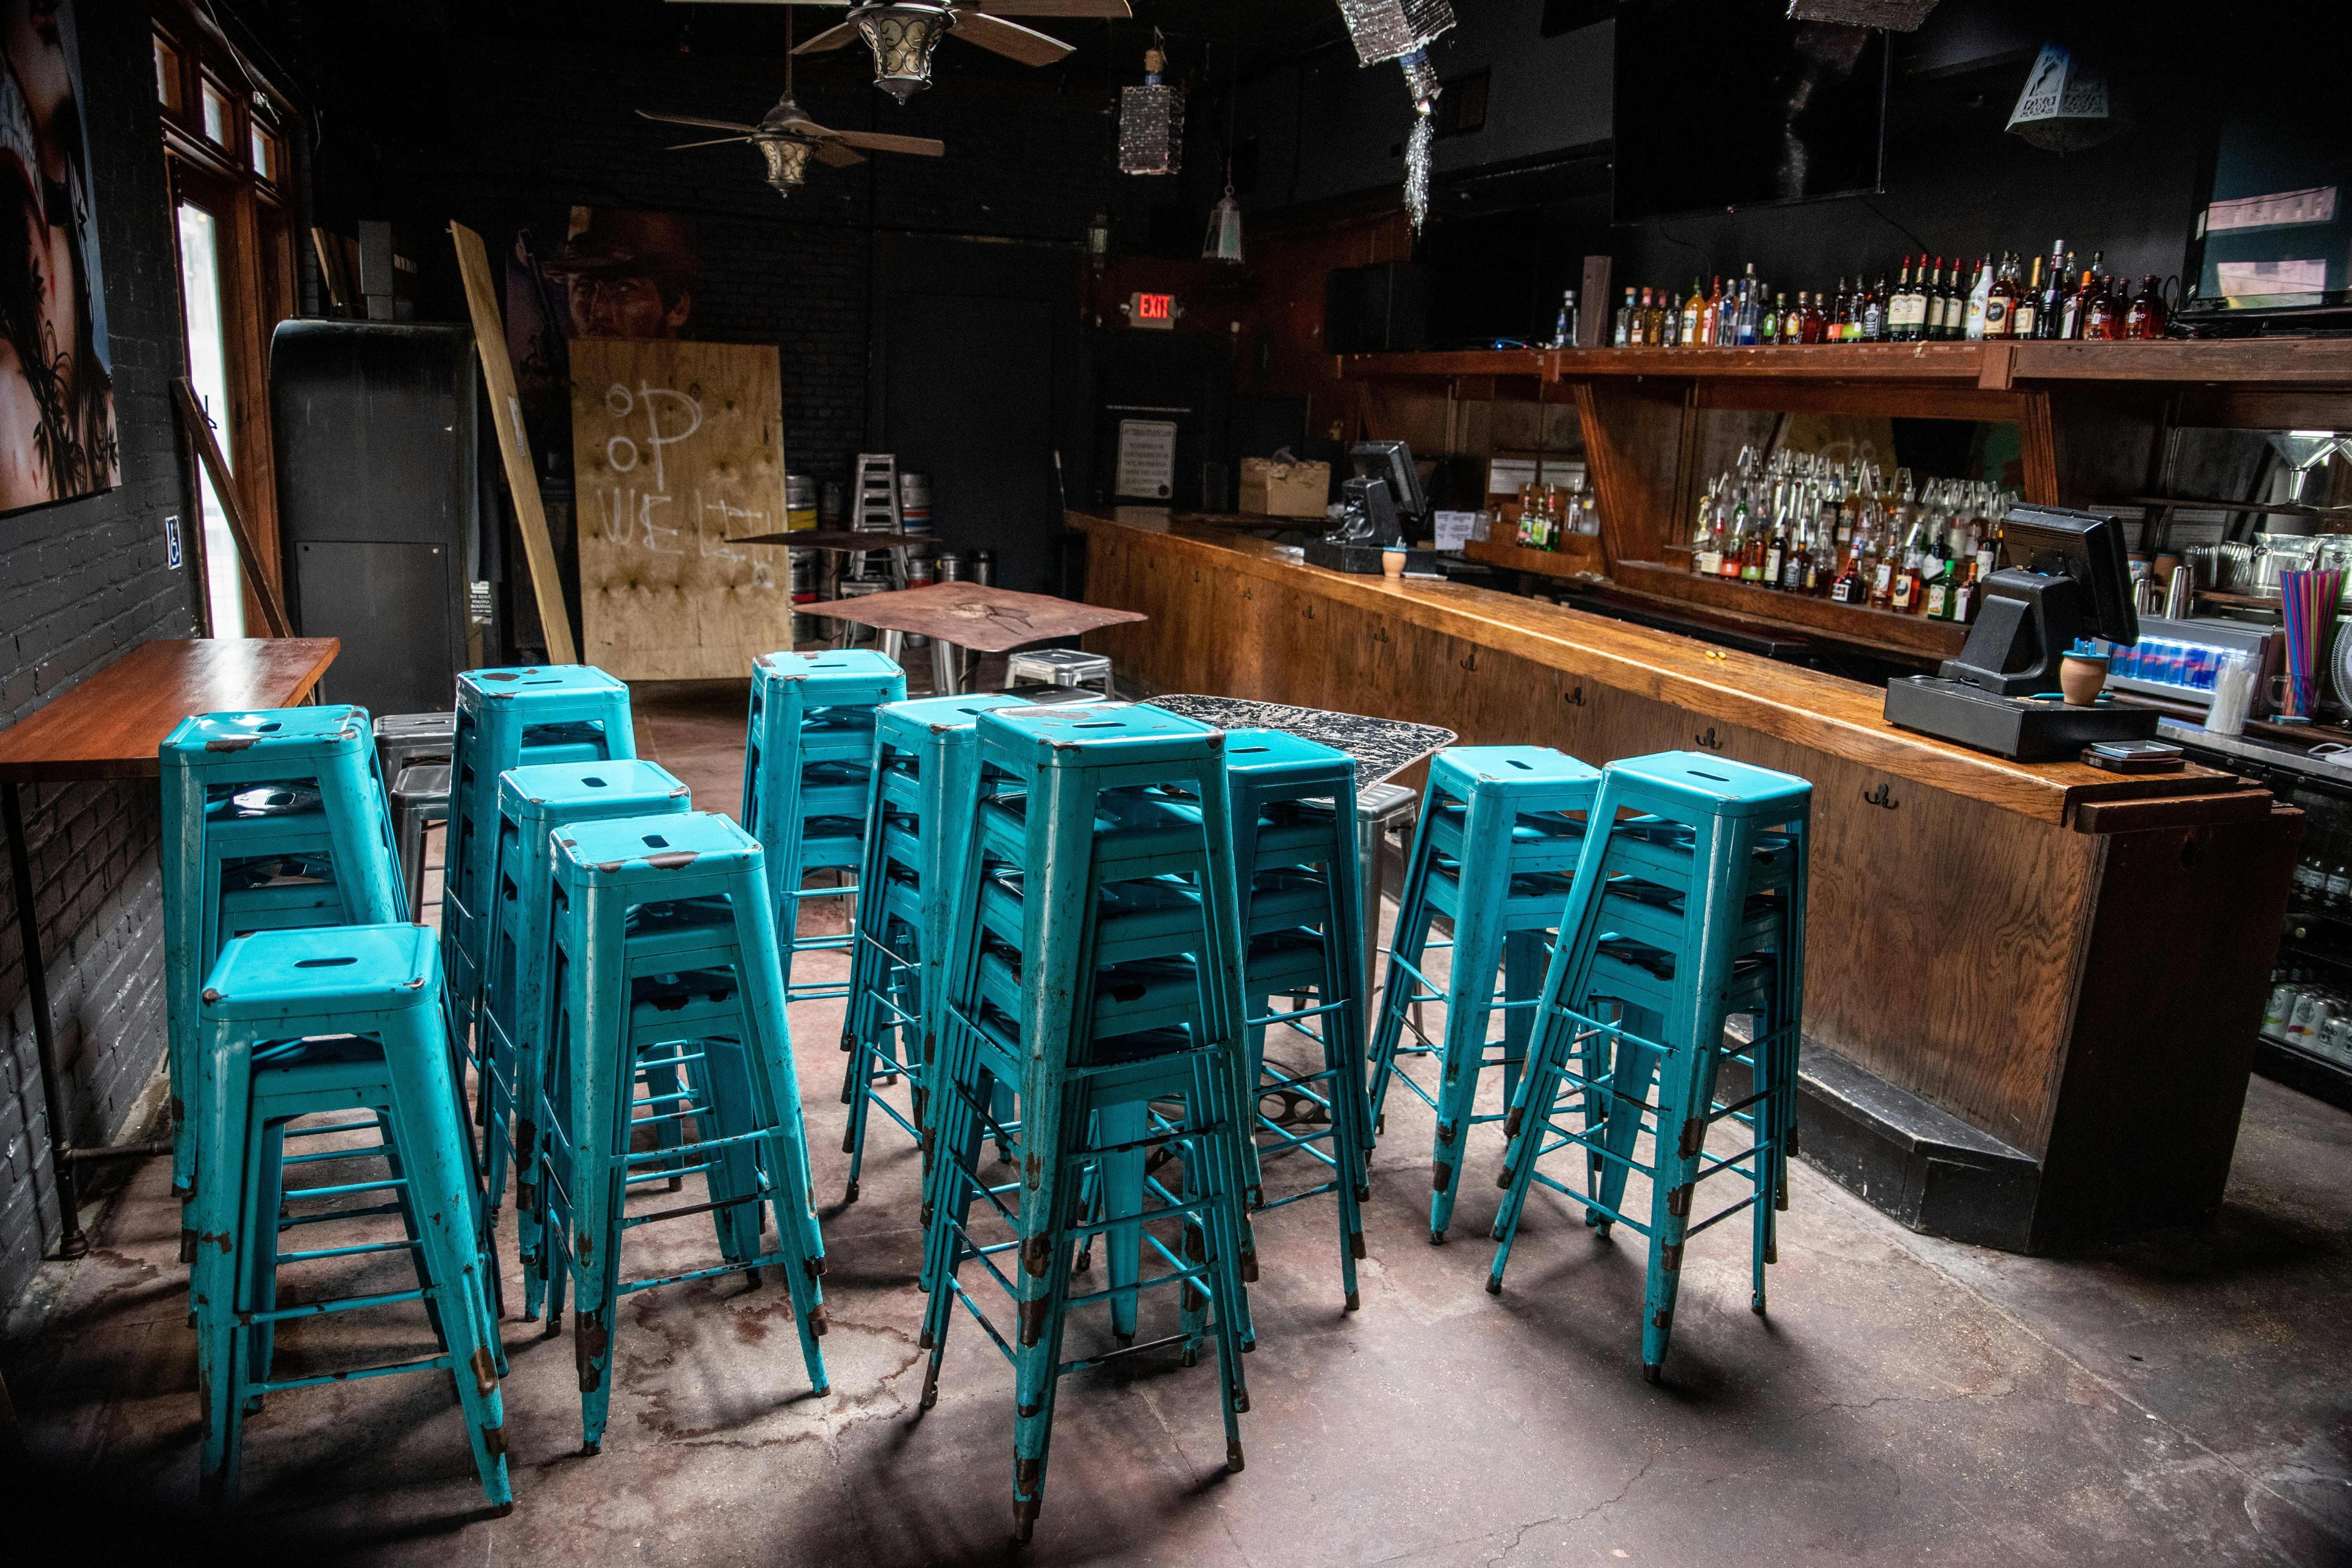 Chairs sit stacked inside a closed bar.